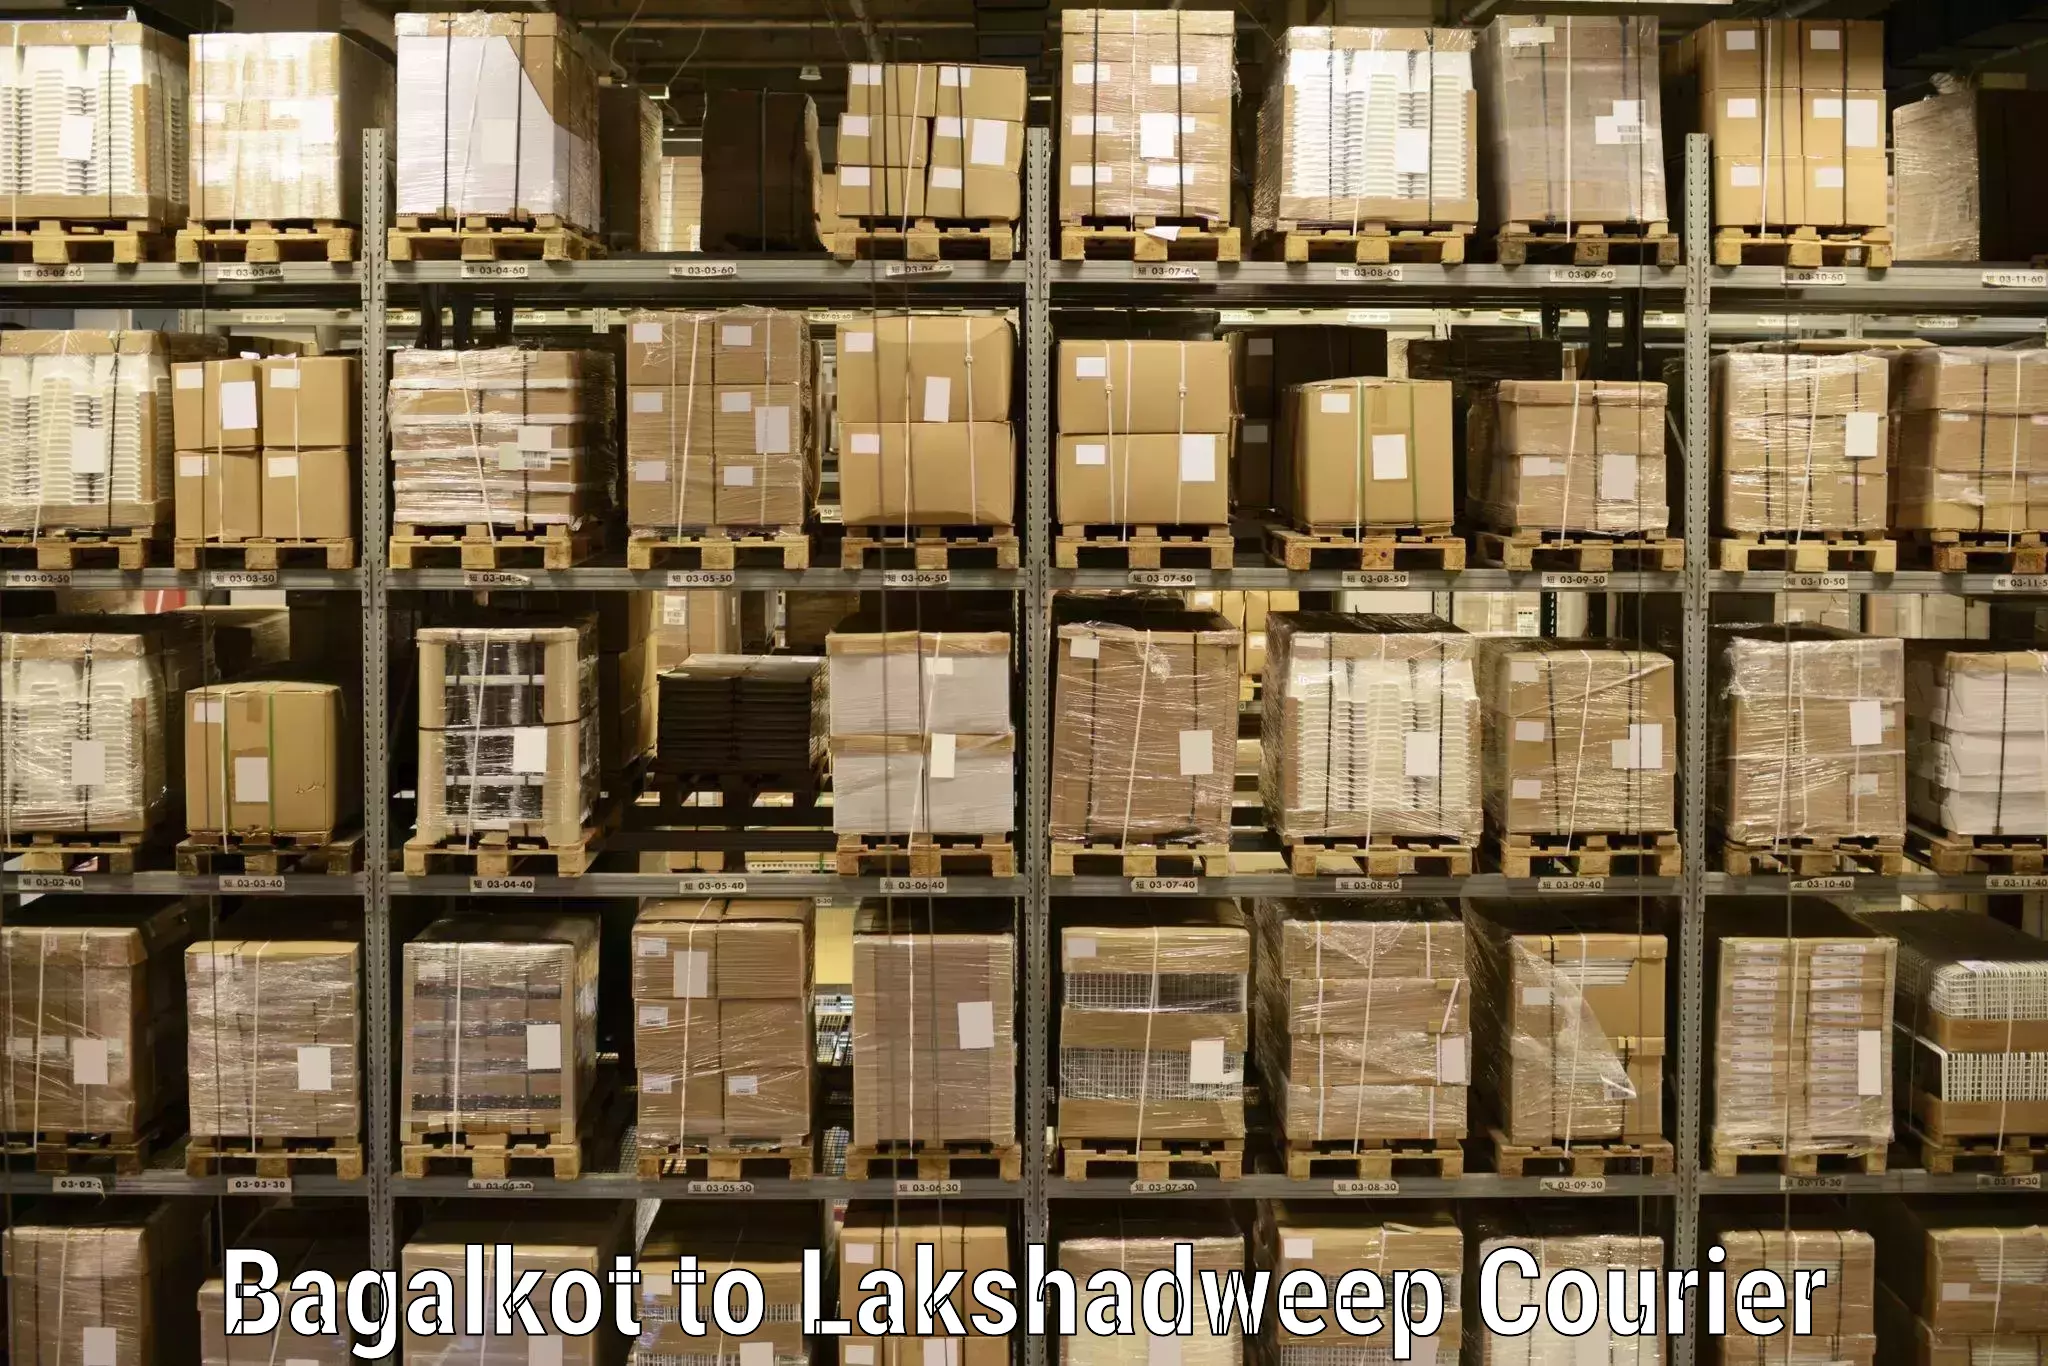 Ocean freight courier Bagalkot to Lakshadweep